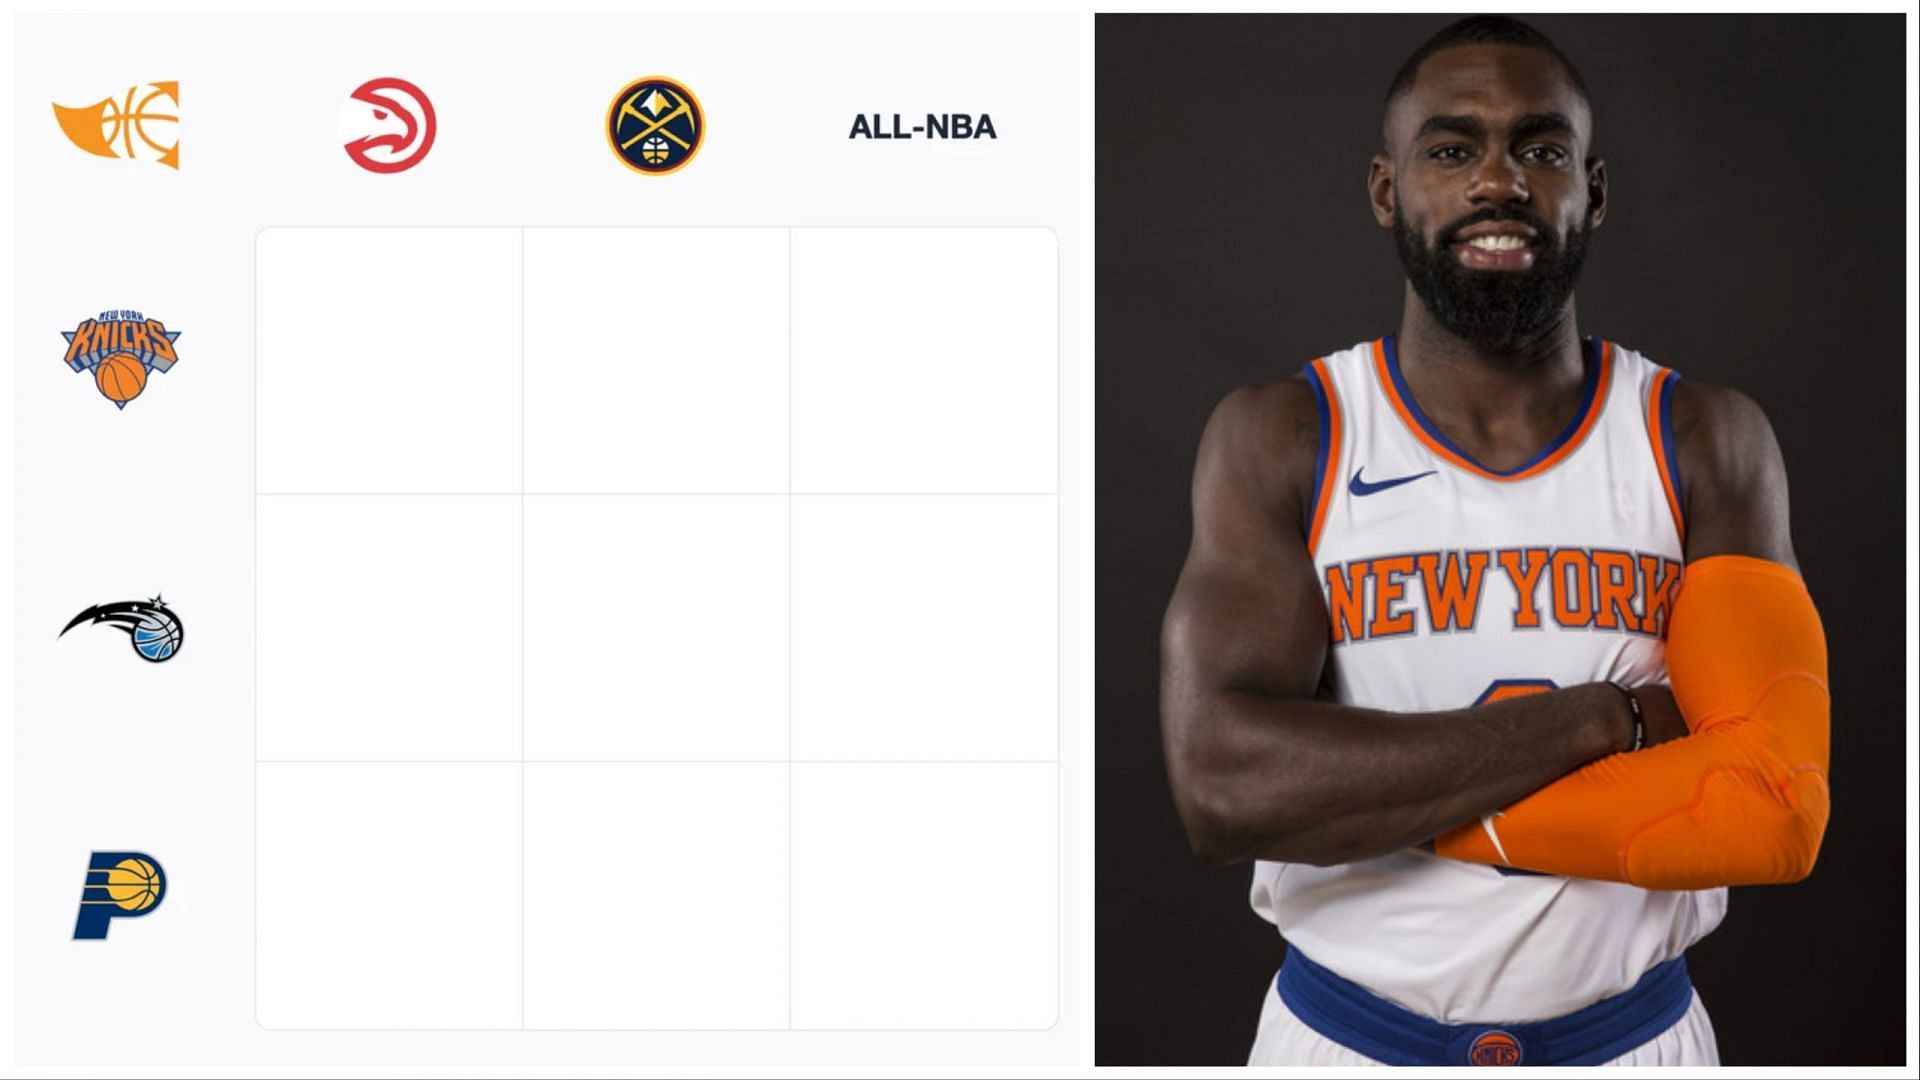 Which Knicks players have also played for Hawks and Nuggets? NBA Immaculate Grid answers for September 10